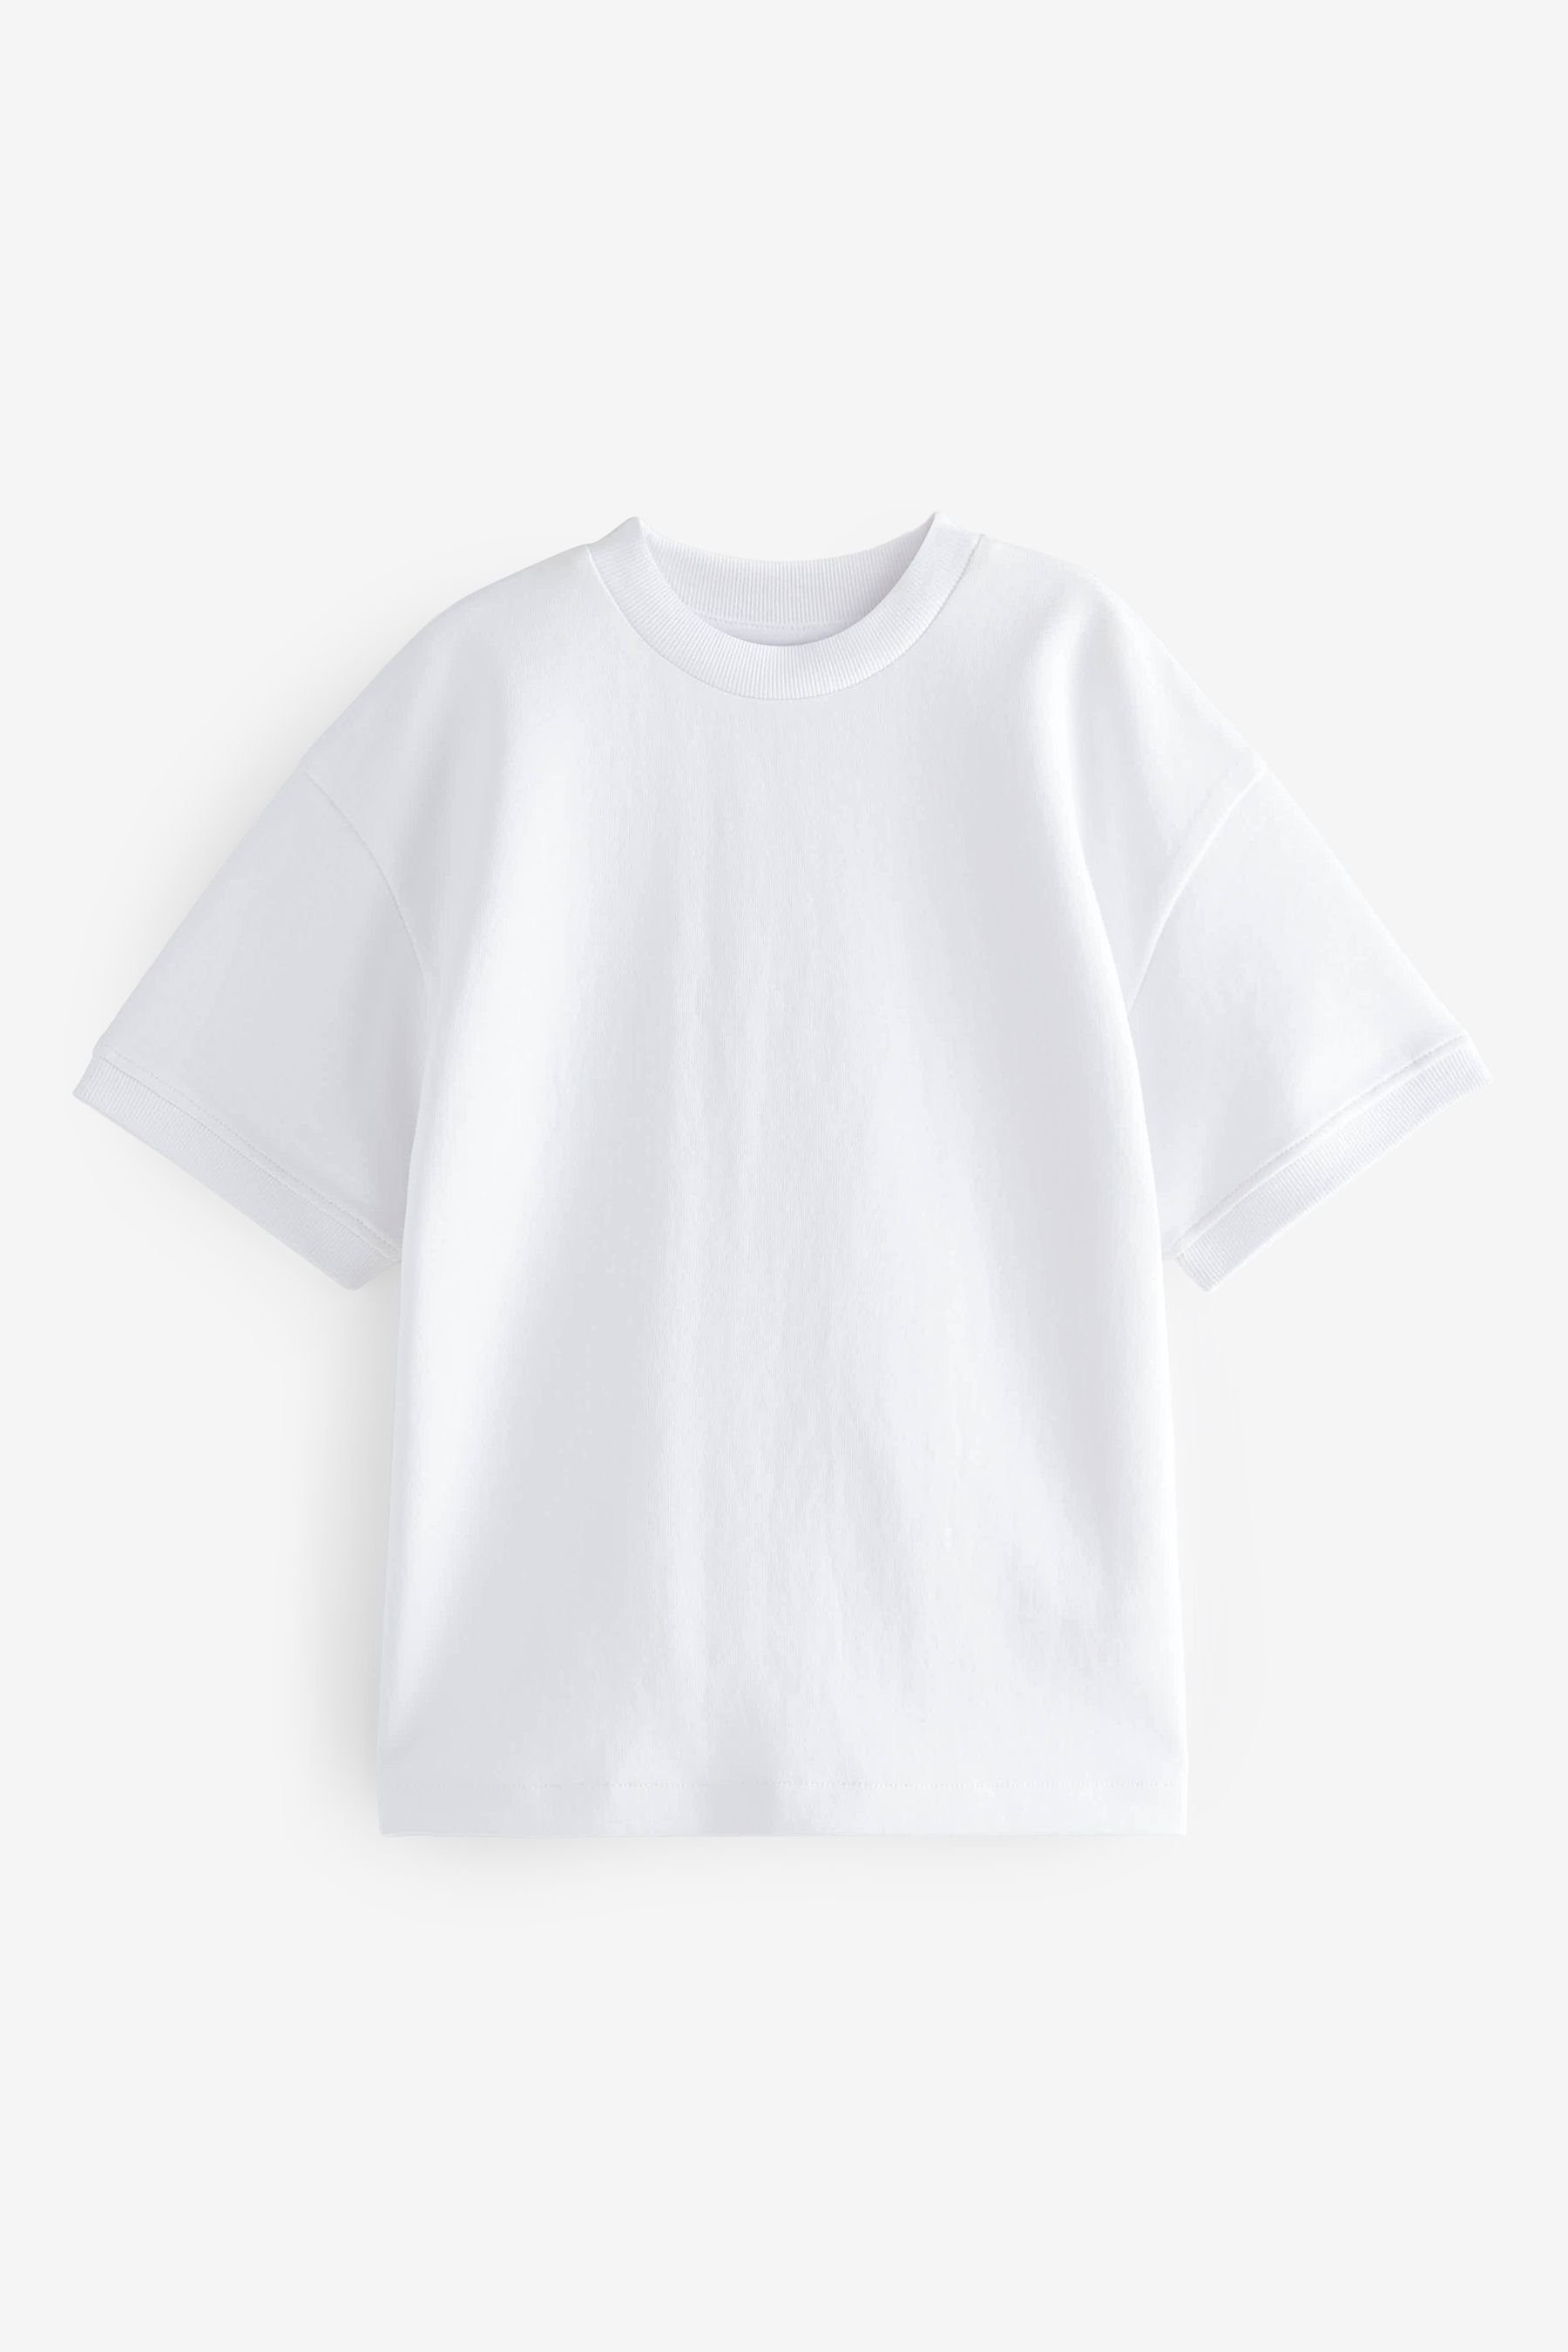 Next T-Shirt T-Shirt aus schwerem Material in Relaxed Fit (1-tlg) White